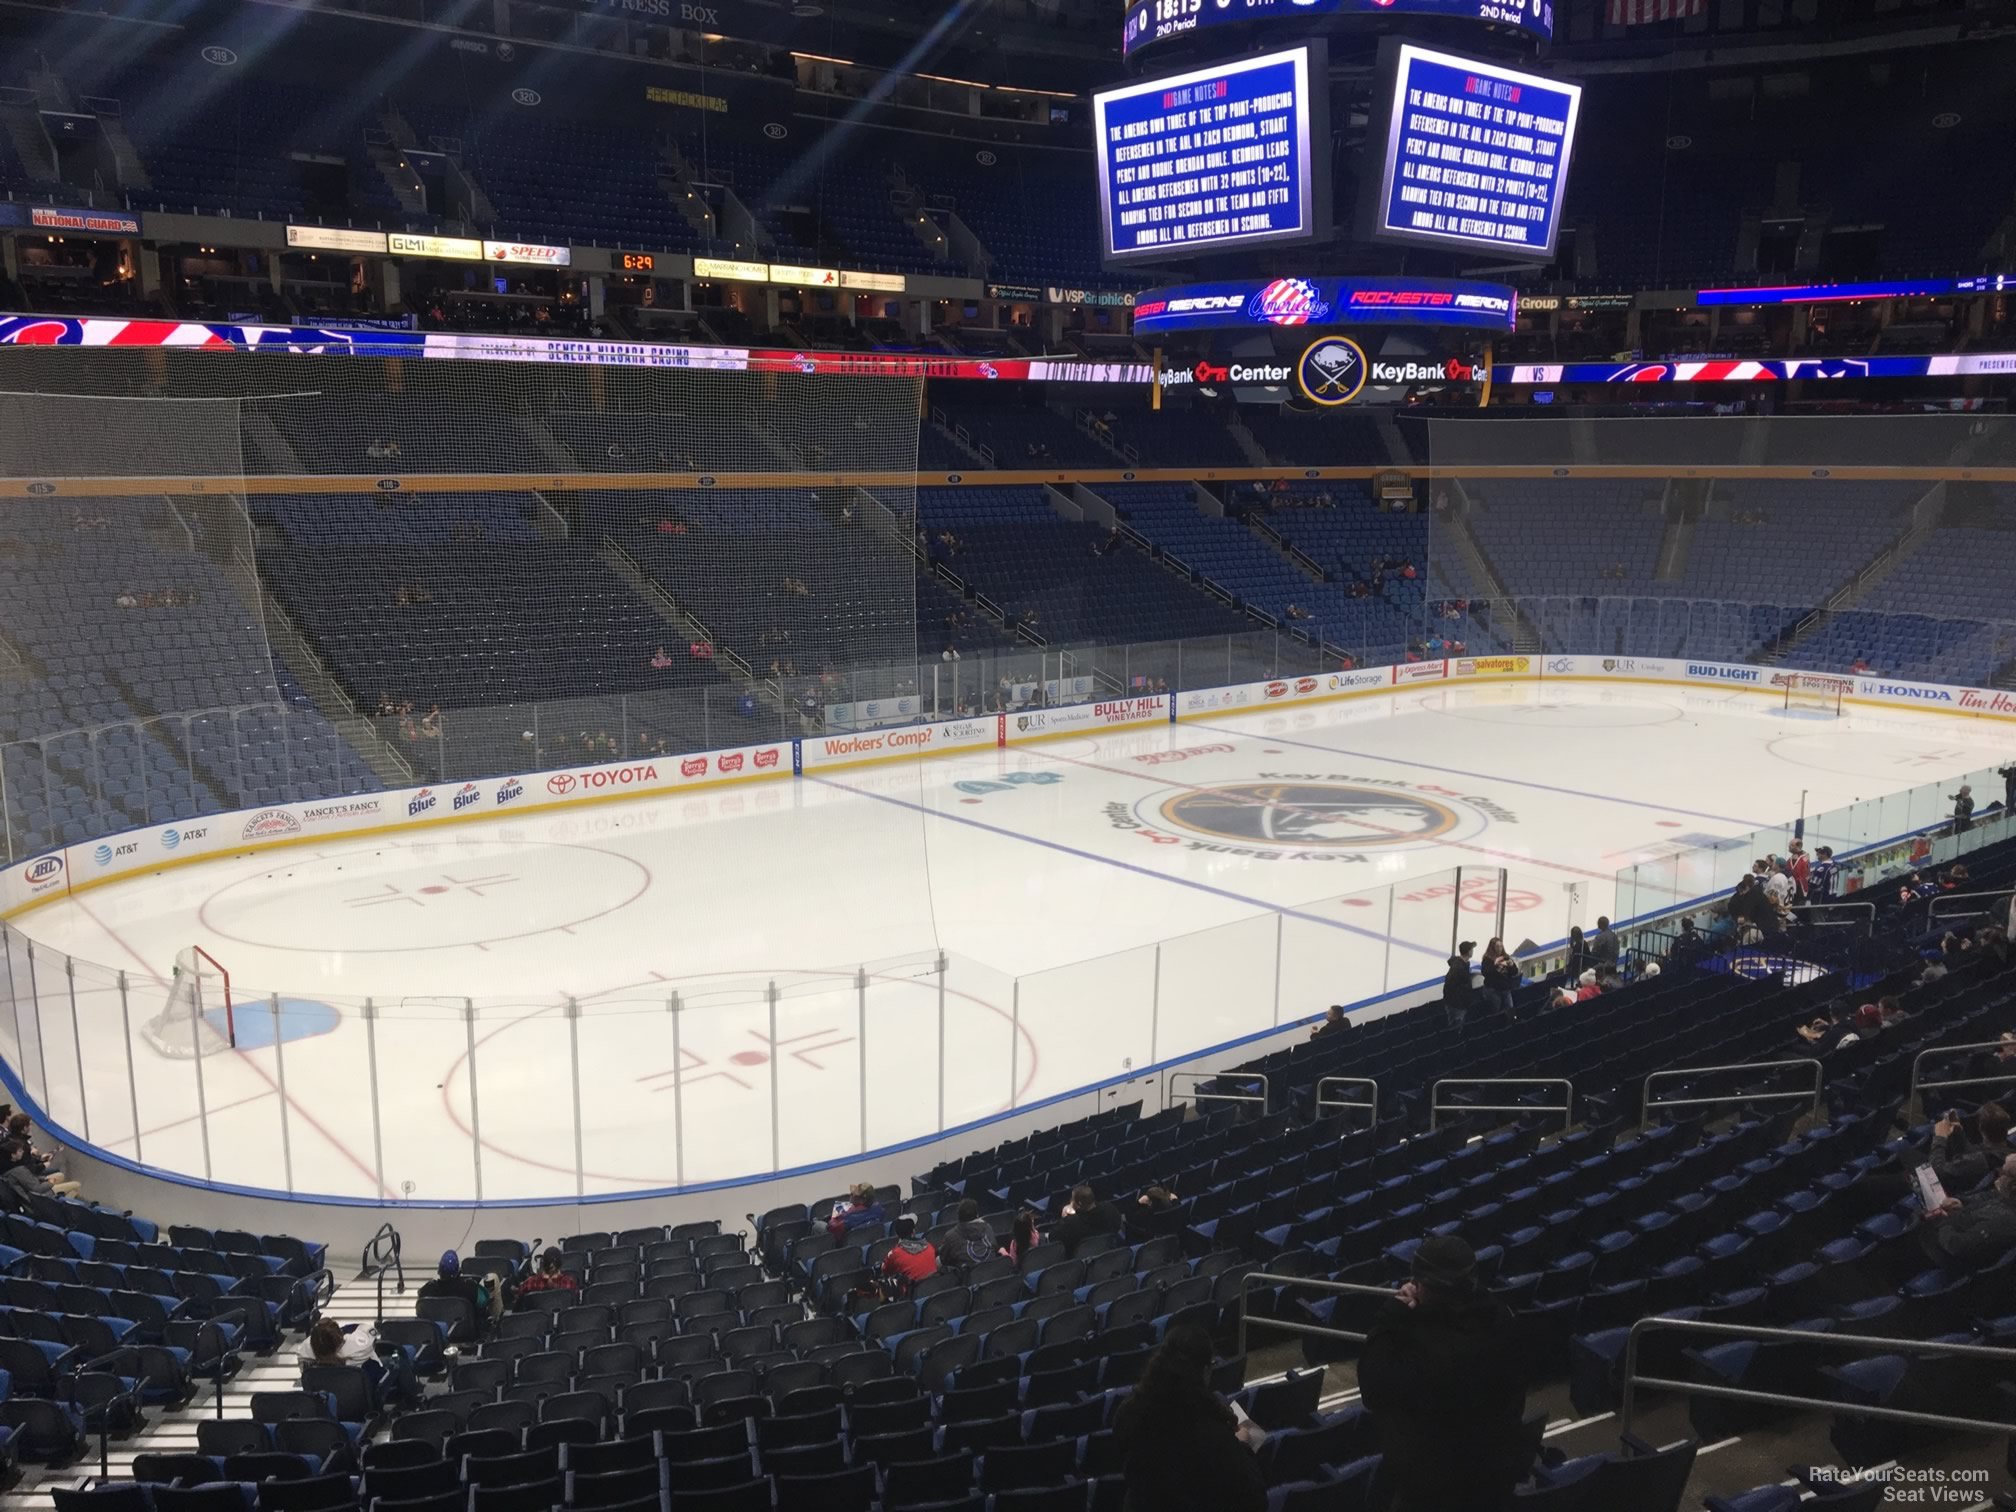 section 211, row 4 seat view  for hockey - keybank center